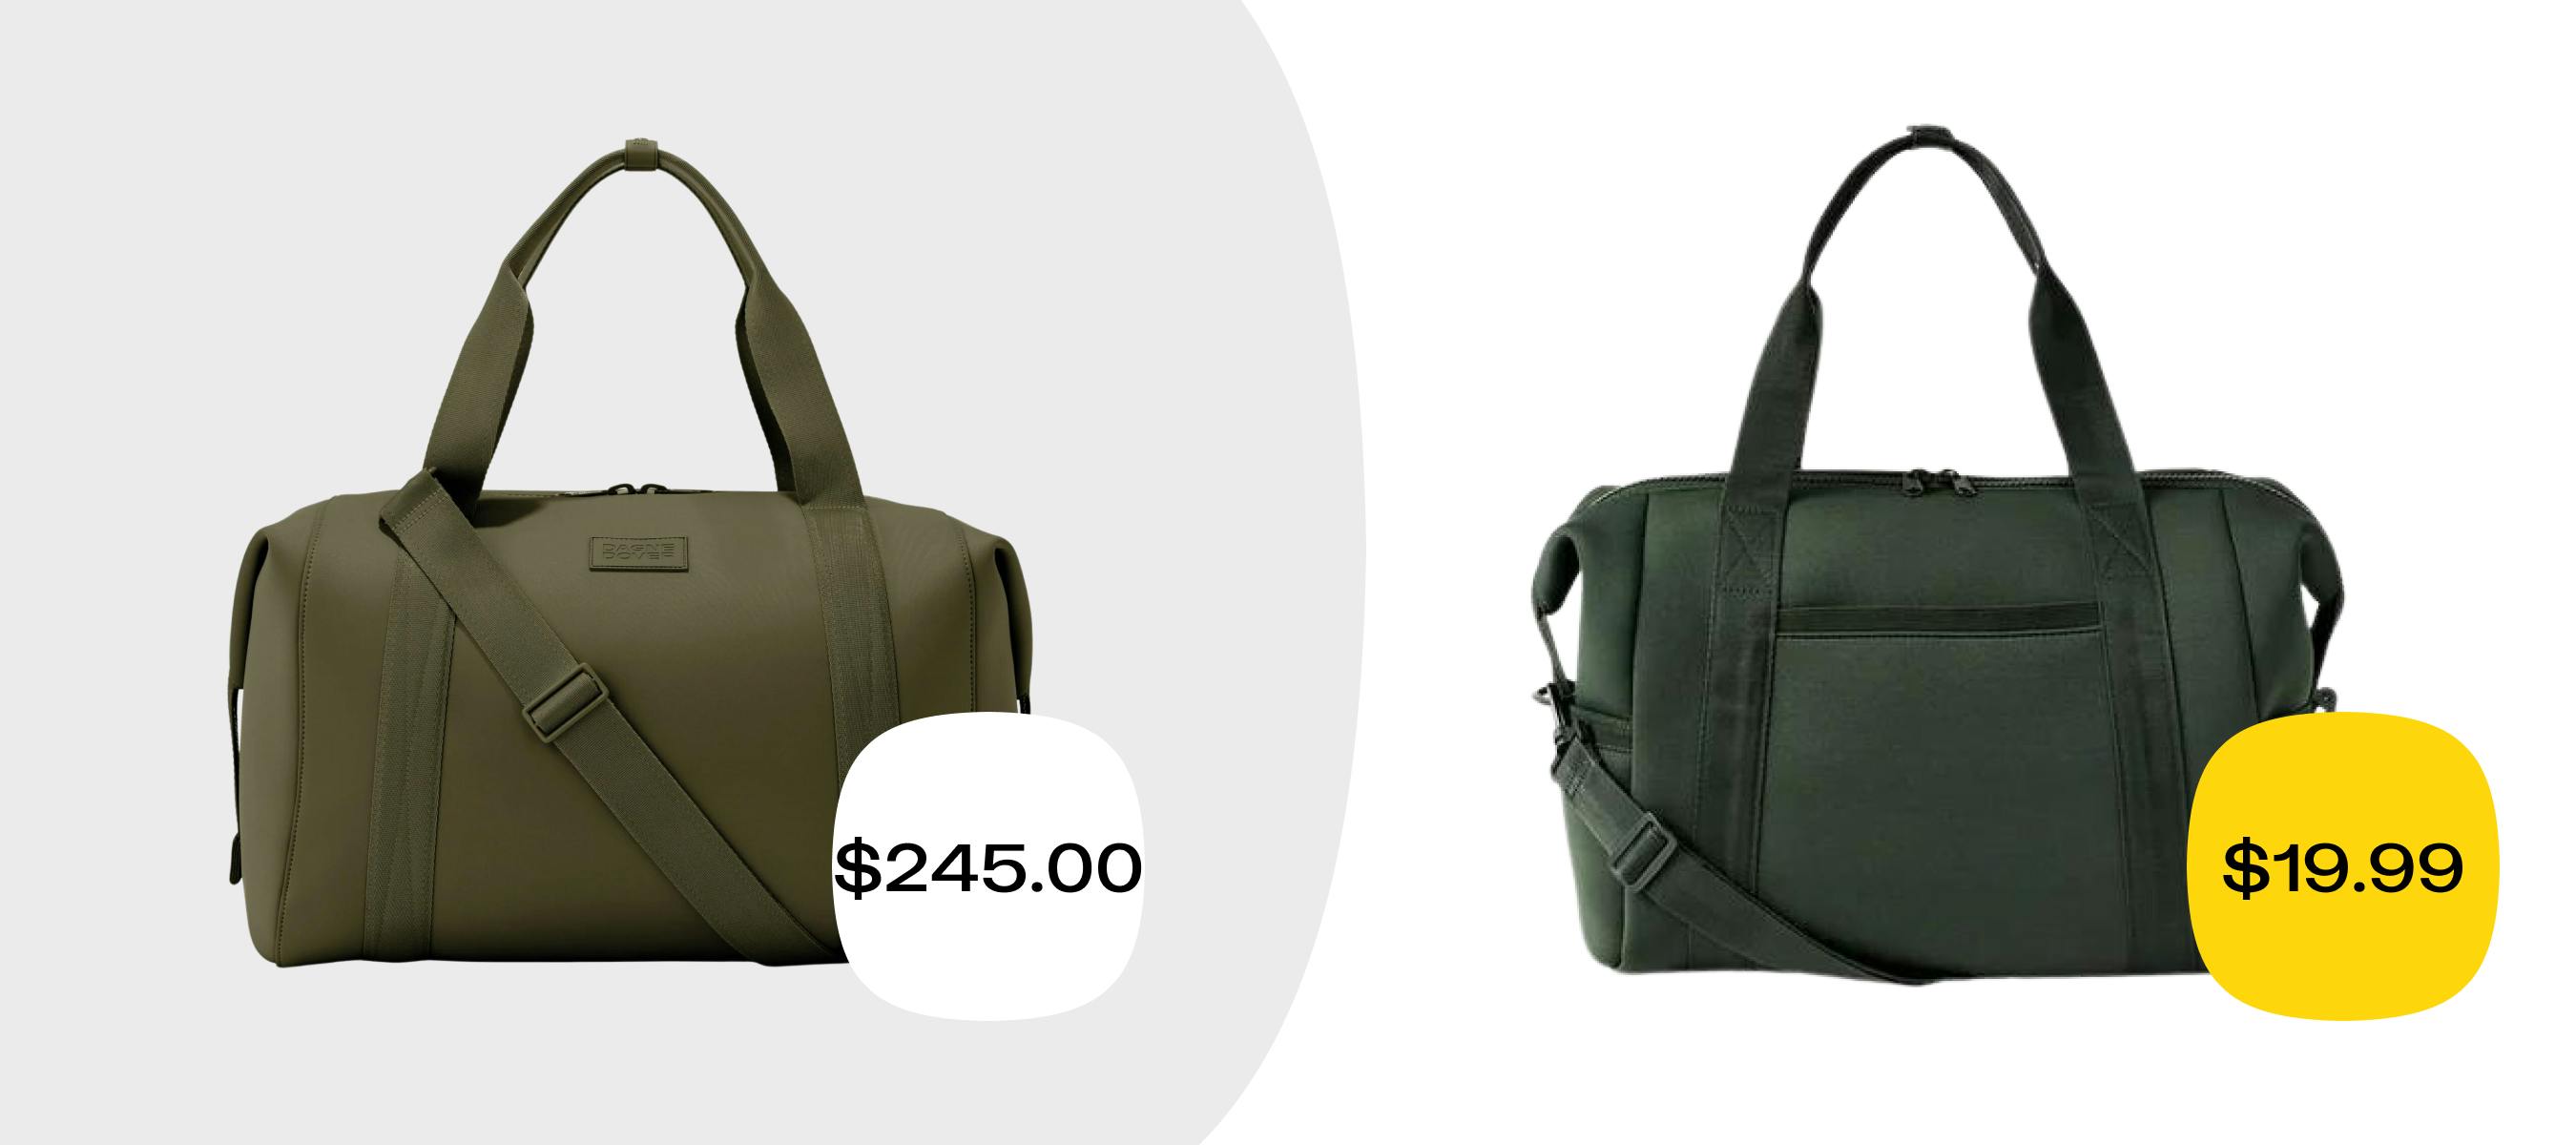 Aldi Is Selling a Bogg Bag Dupe for Under $25 & It Comes in 3 Colors –  SheKnows